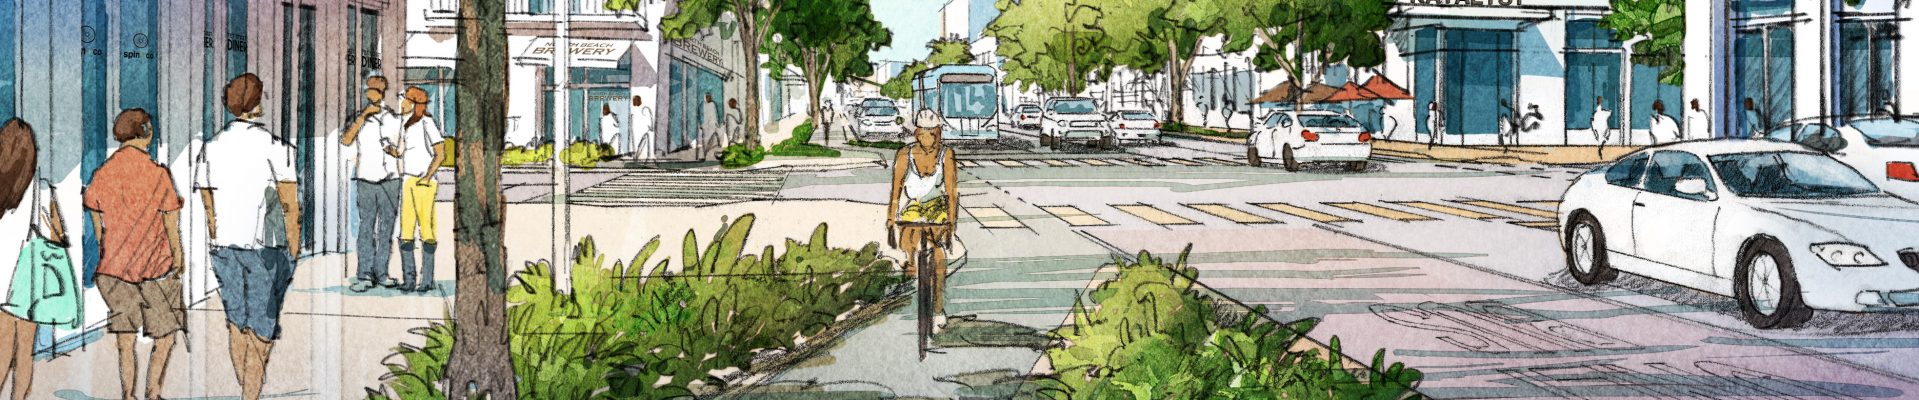 Street Plans + Happy City Build One-Day Public Space Intervention in West Palm Beach, FL